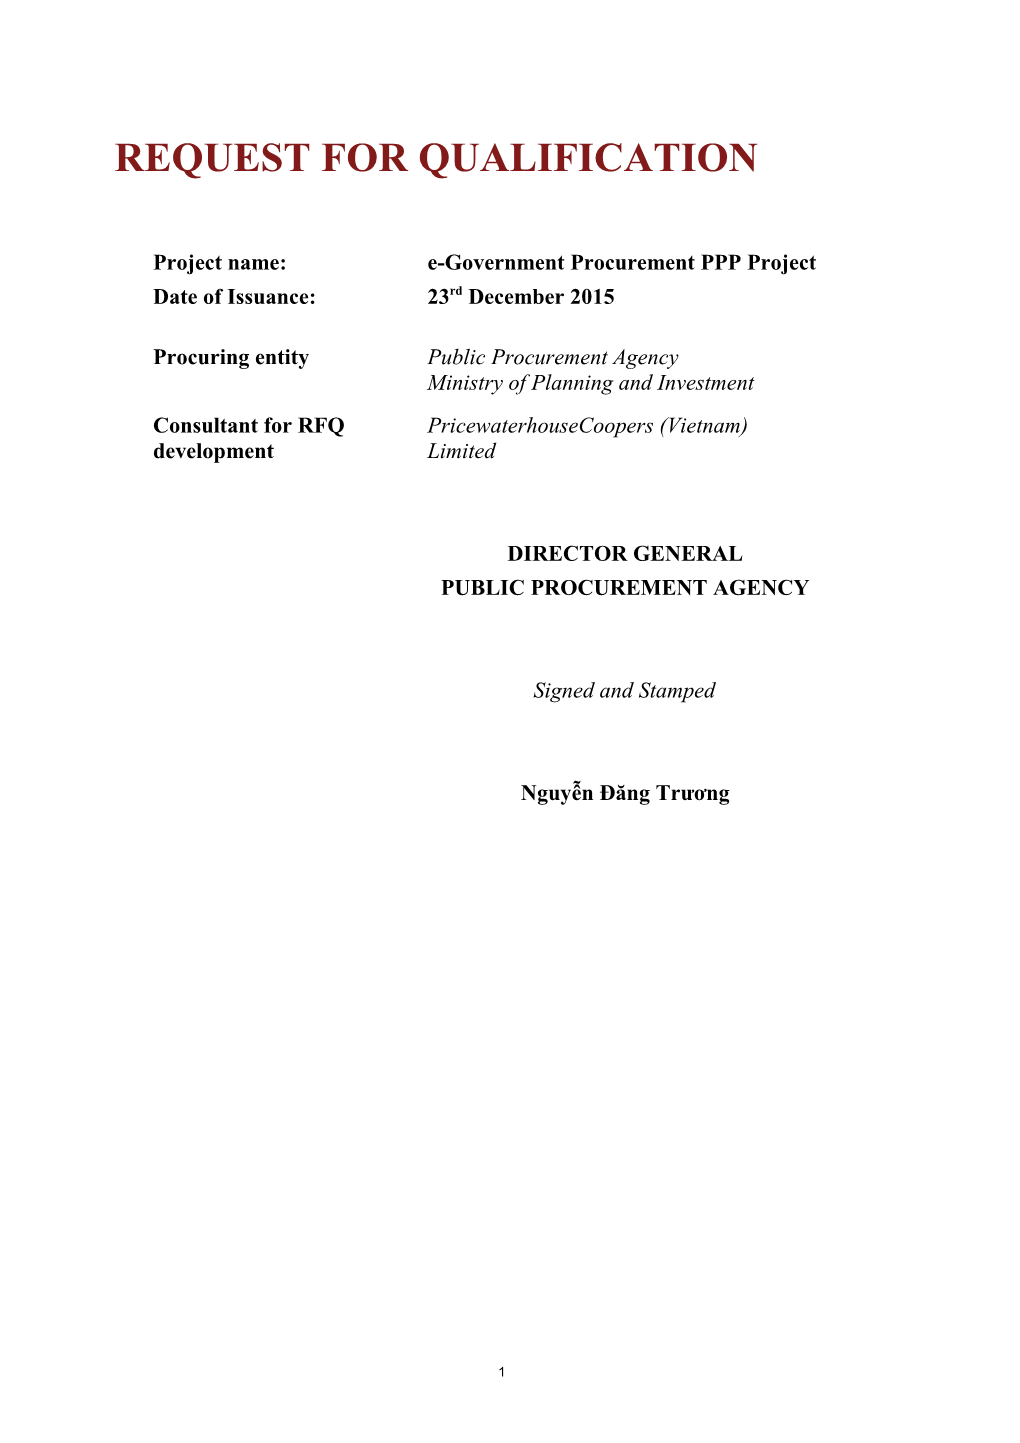 1. Overall Project Summary - the E-Government Procurement PPP Project 4